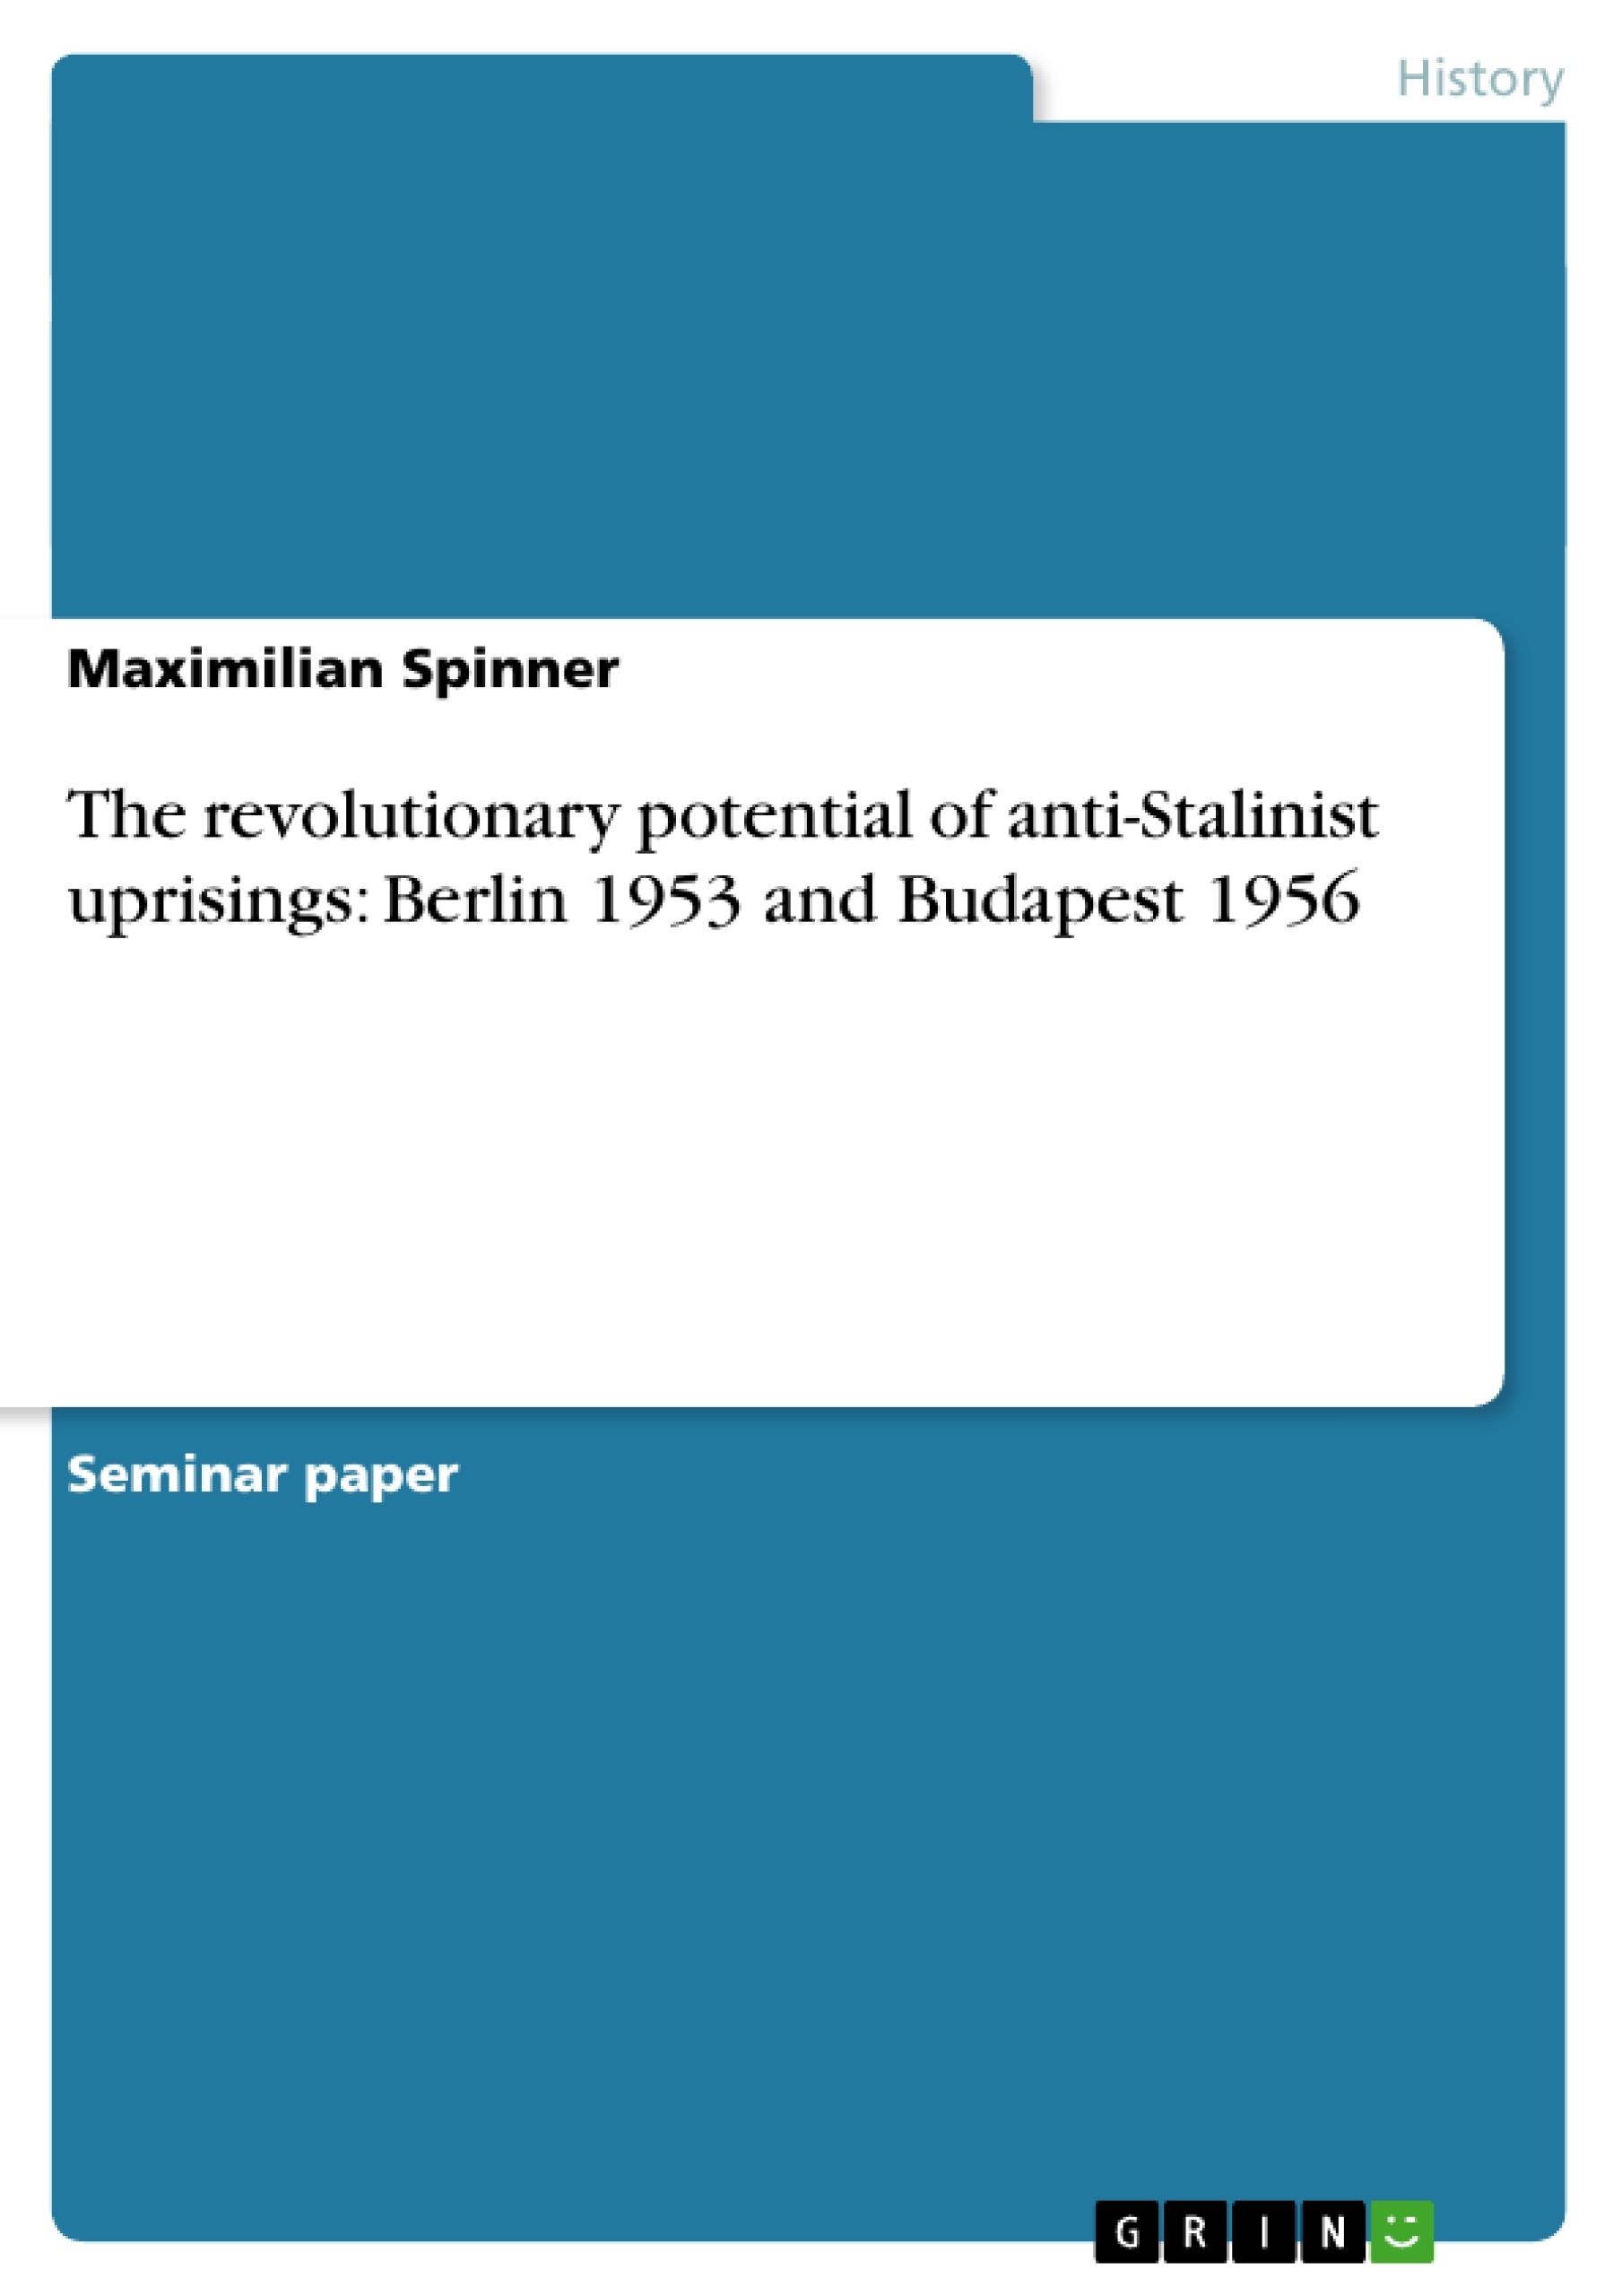 Título: The revolutionary potential of anti-Stalinist uprisings: Berlin 1953 and Budapest 1956